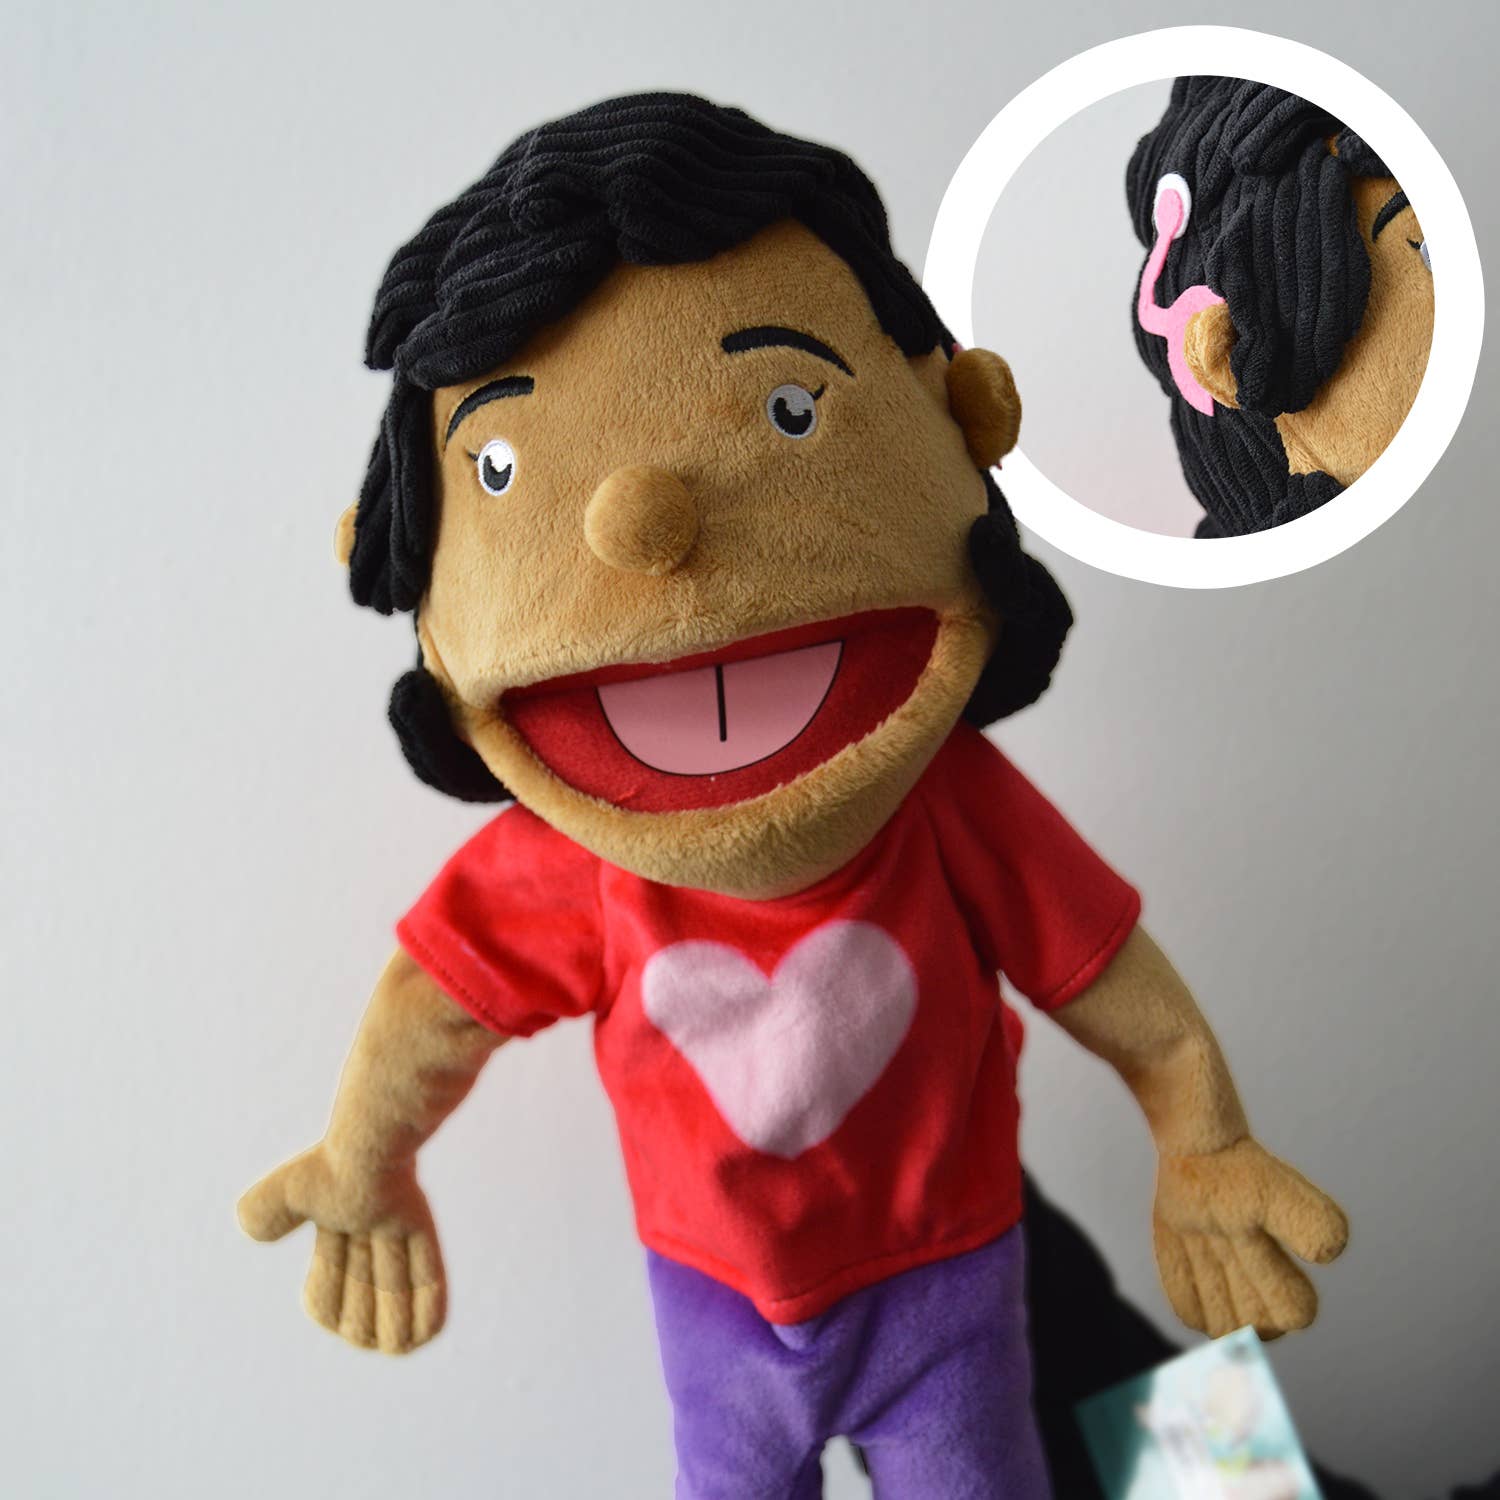 Aanya'S Puppet, Introducing Aanya'S Puppet which is designed to help children learn about emotions and imaginative play. Aanya'S Puppet is equipped with cochlear implants, the Aanya Patel puppet is perfect for early learners and is an excellent tool for social and emotional learning. This realistic-looking puppet is of high-quality material, comes equipped with cochlear implants and is dressed in a cheerful outfit. Aanya Patel puppet serves as a valuable education aid in classrooms and homes. It is designed